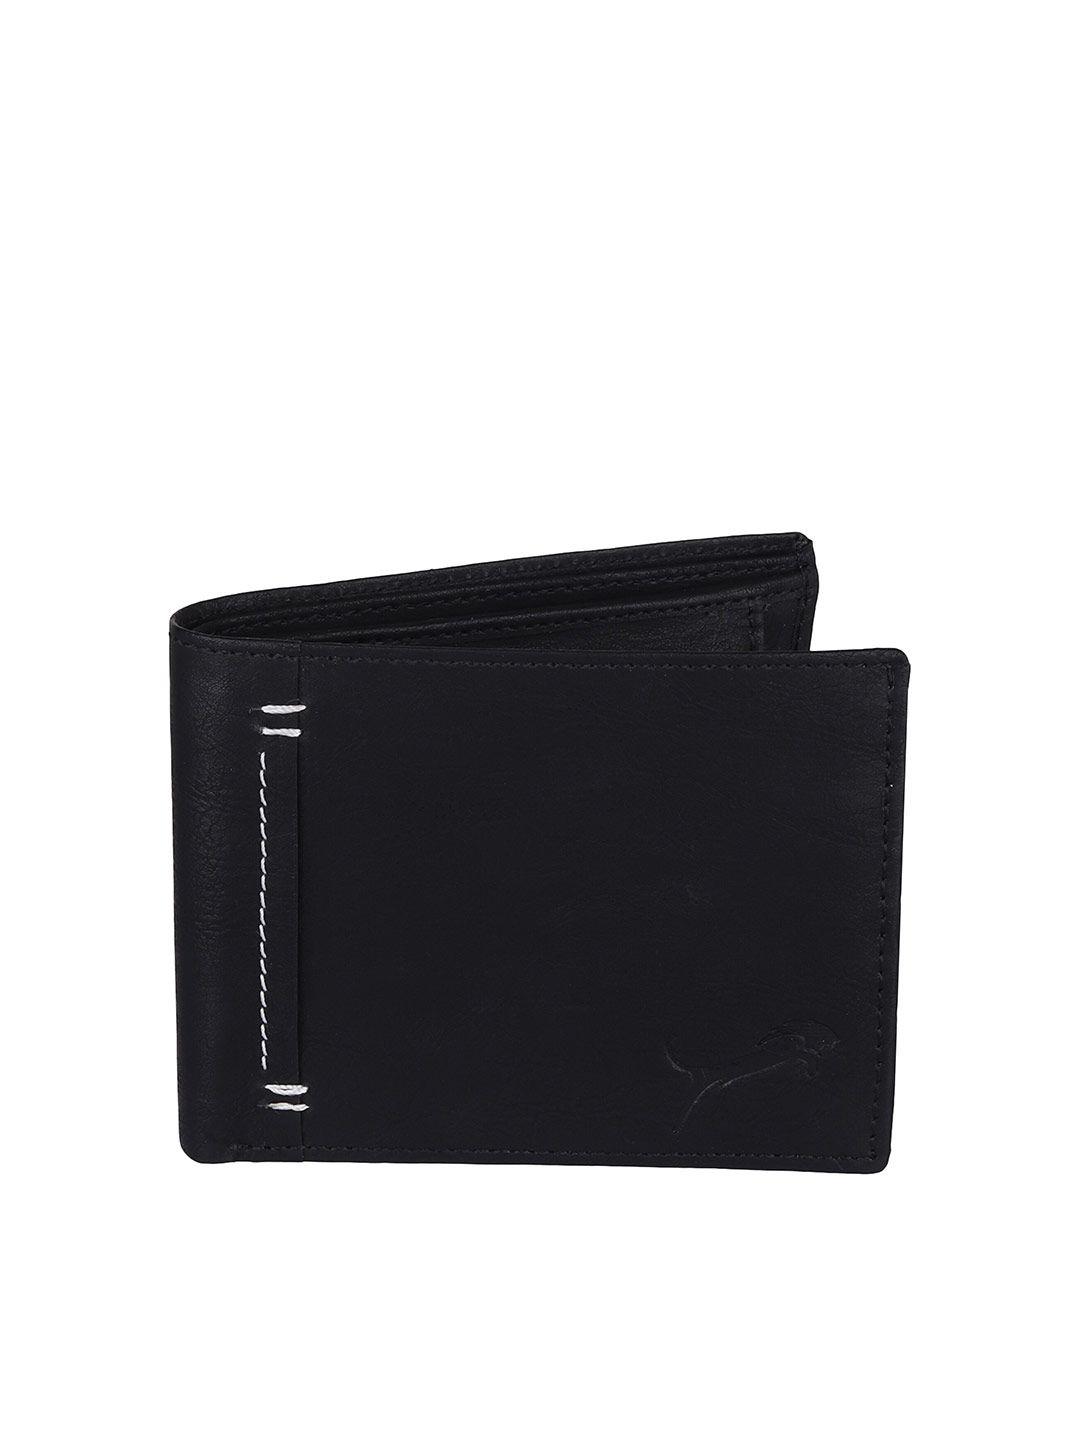 wild edge men black textured leather two fold wallet with sd card holder